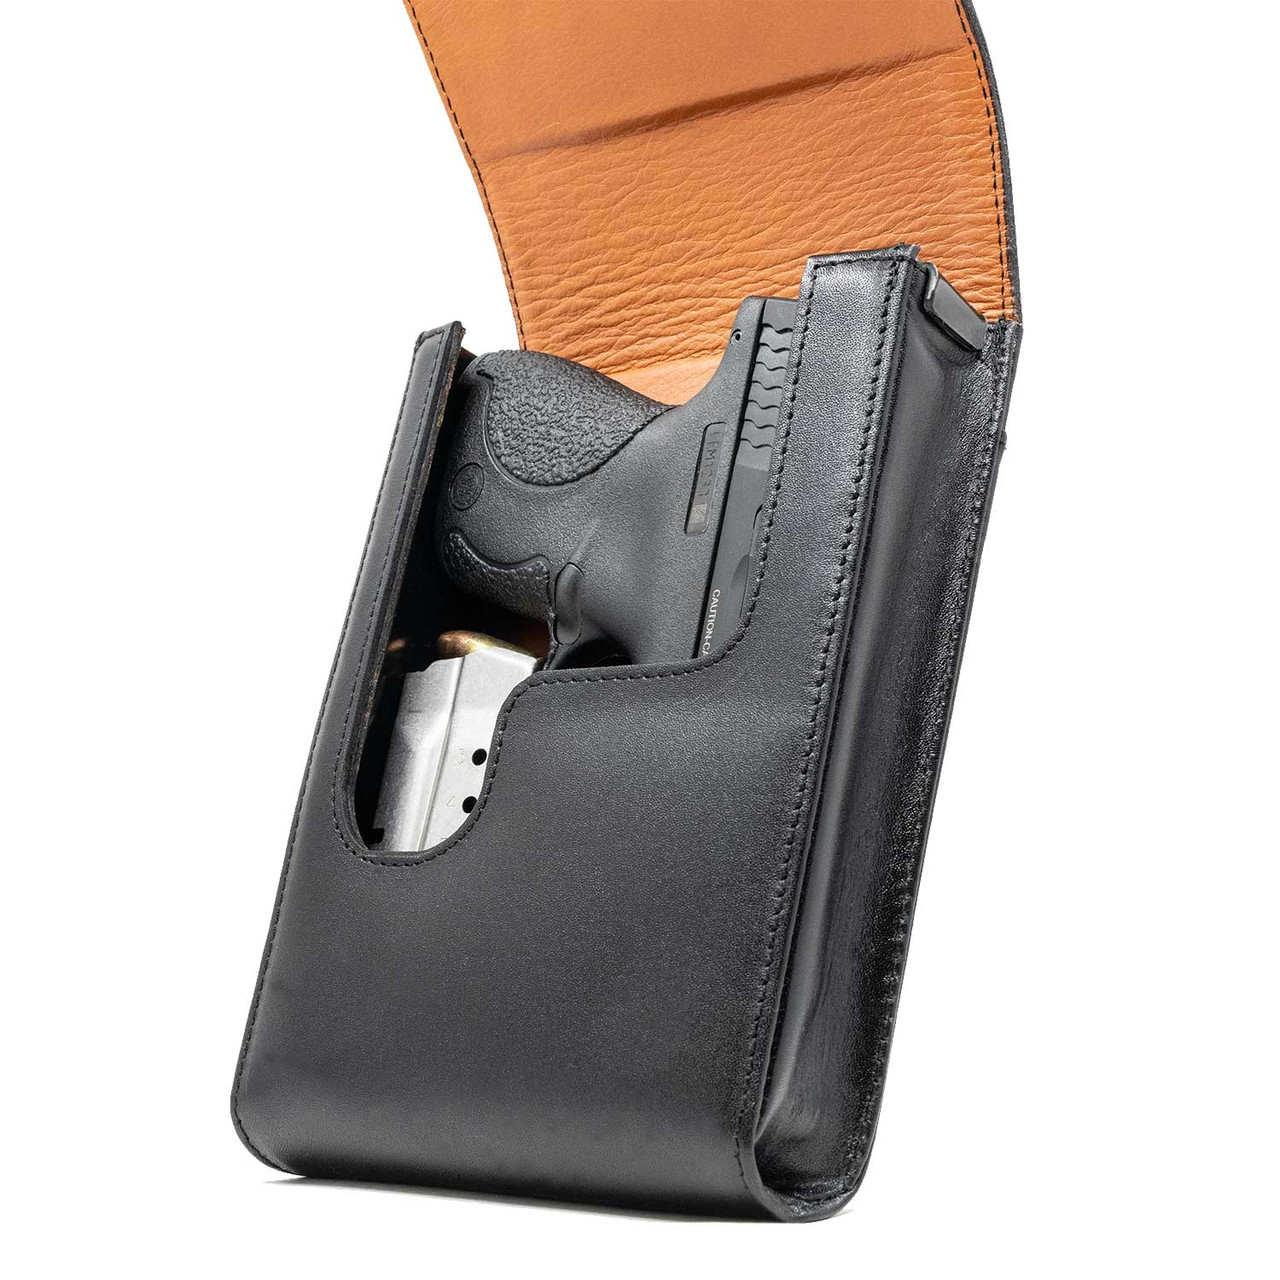 The Ruger SR40c Xtra Mag Black Leather Holster